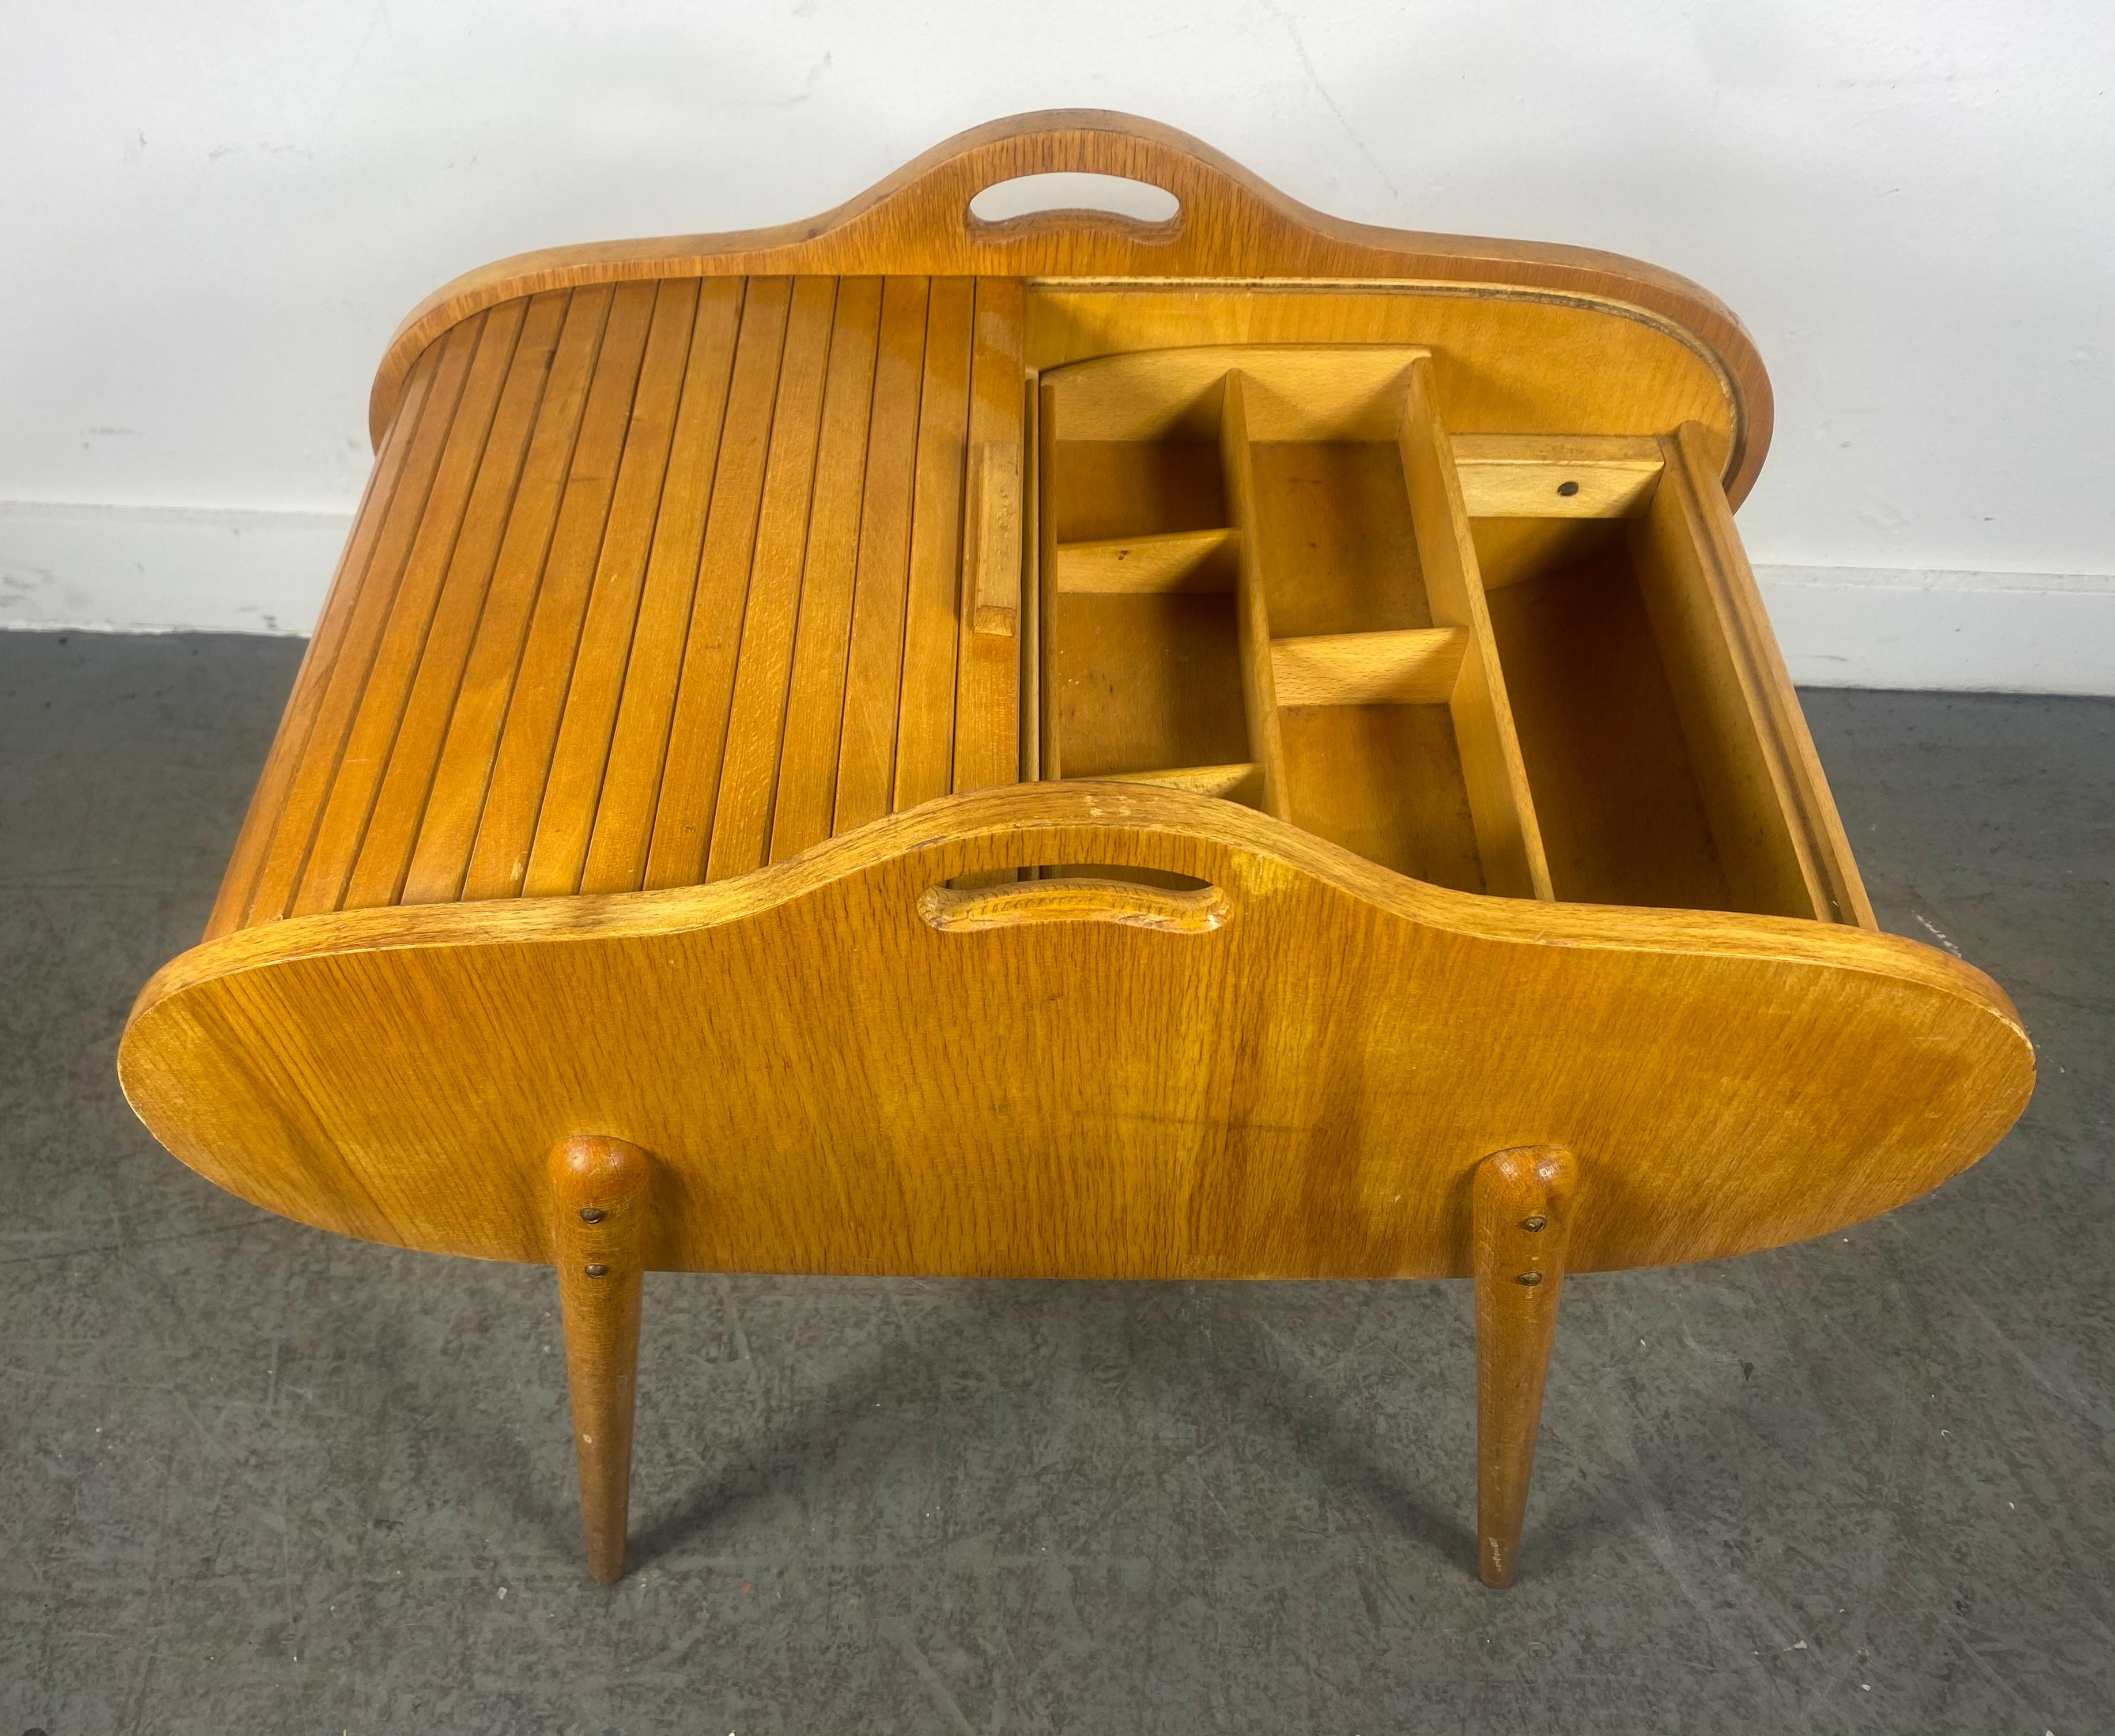 
Mid-century Danish sewing box with a tambour roll top dating from the 1950/60s.
The top rolls around the whole box-body forward and back.

Larger than the average sewing box with mid-century Danish styling and a beautiful light wood finish.
A very